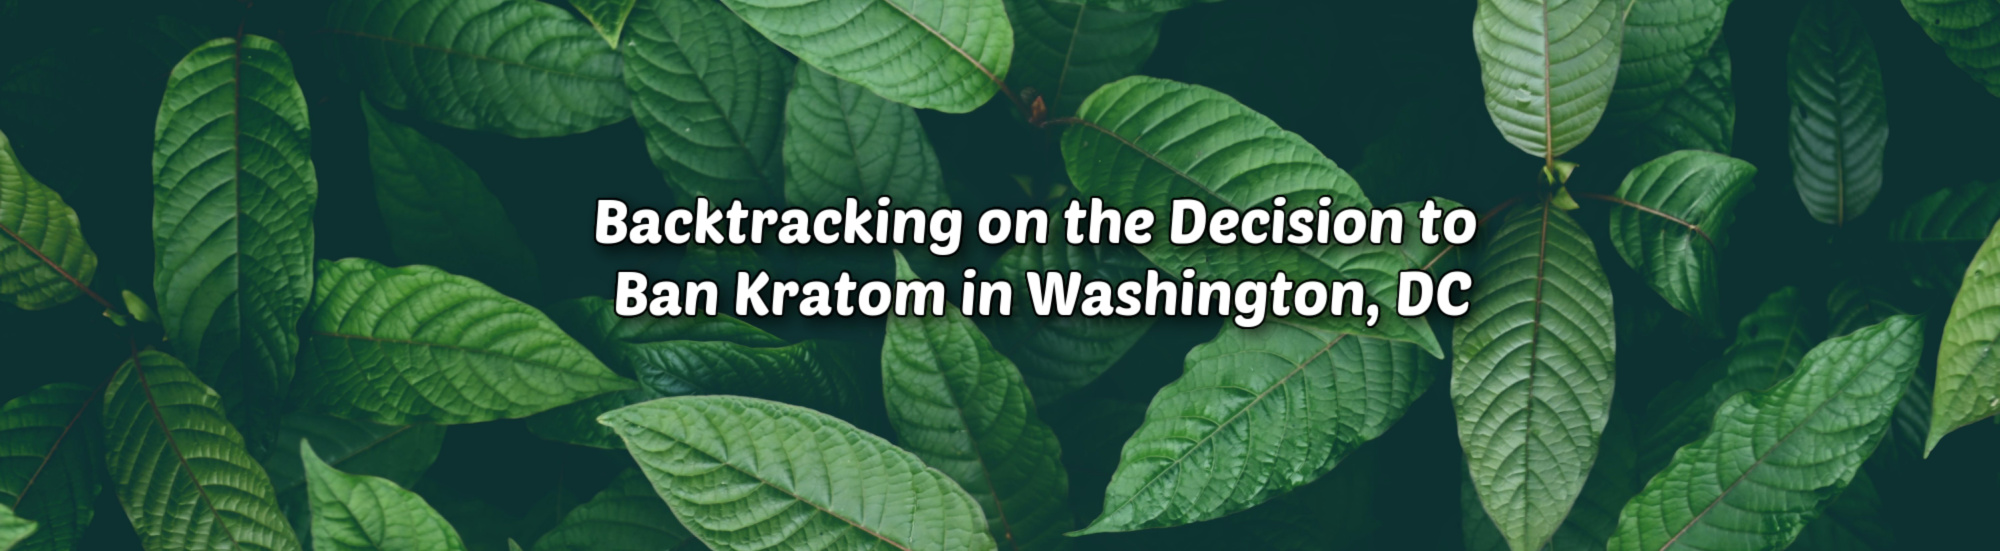 image of backtracking on the decision to ban kratom in washington dc